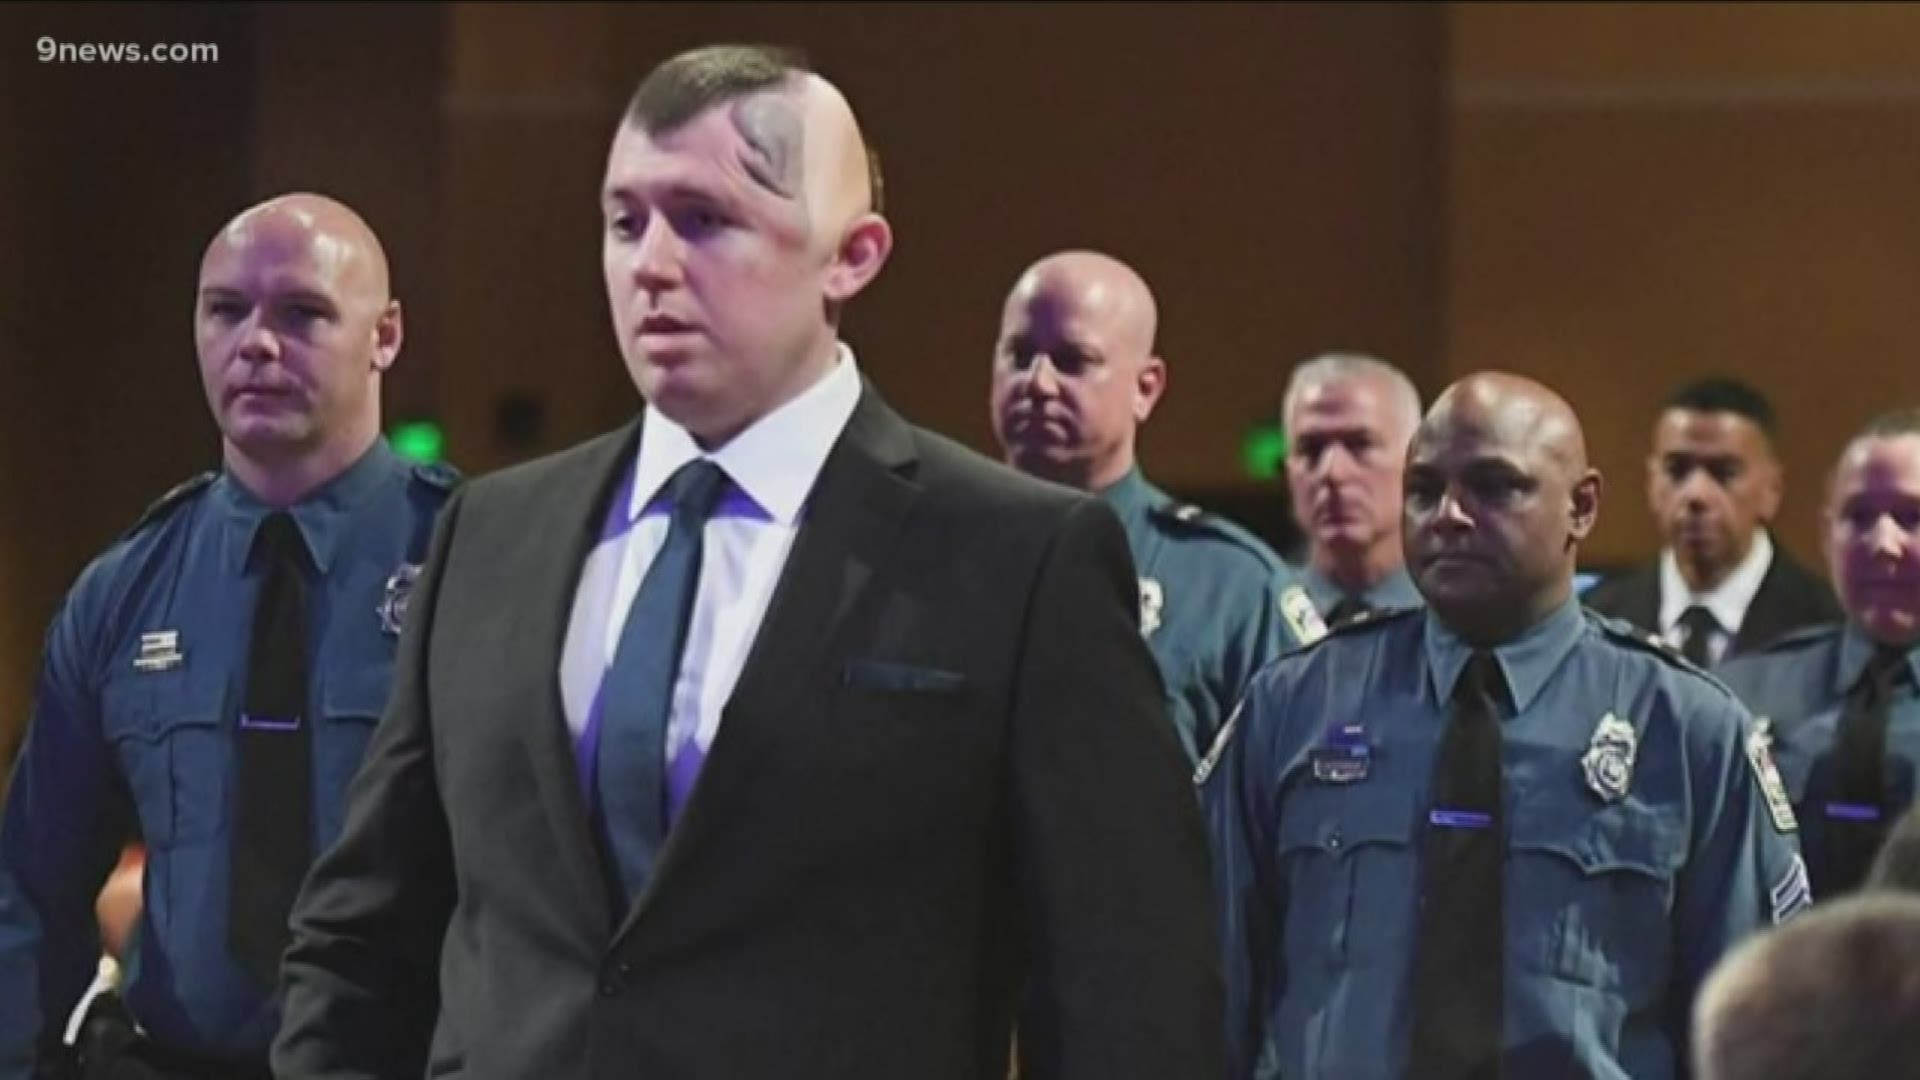 Colorado Springs police officer Cem Duzel led the procession of 31 fellow award recipients and received the Medal of Honor and the Purple Heart.